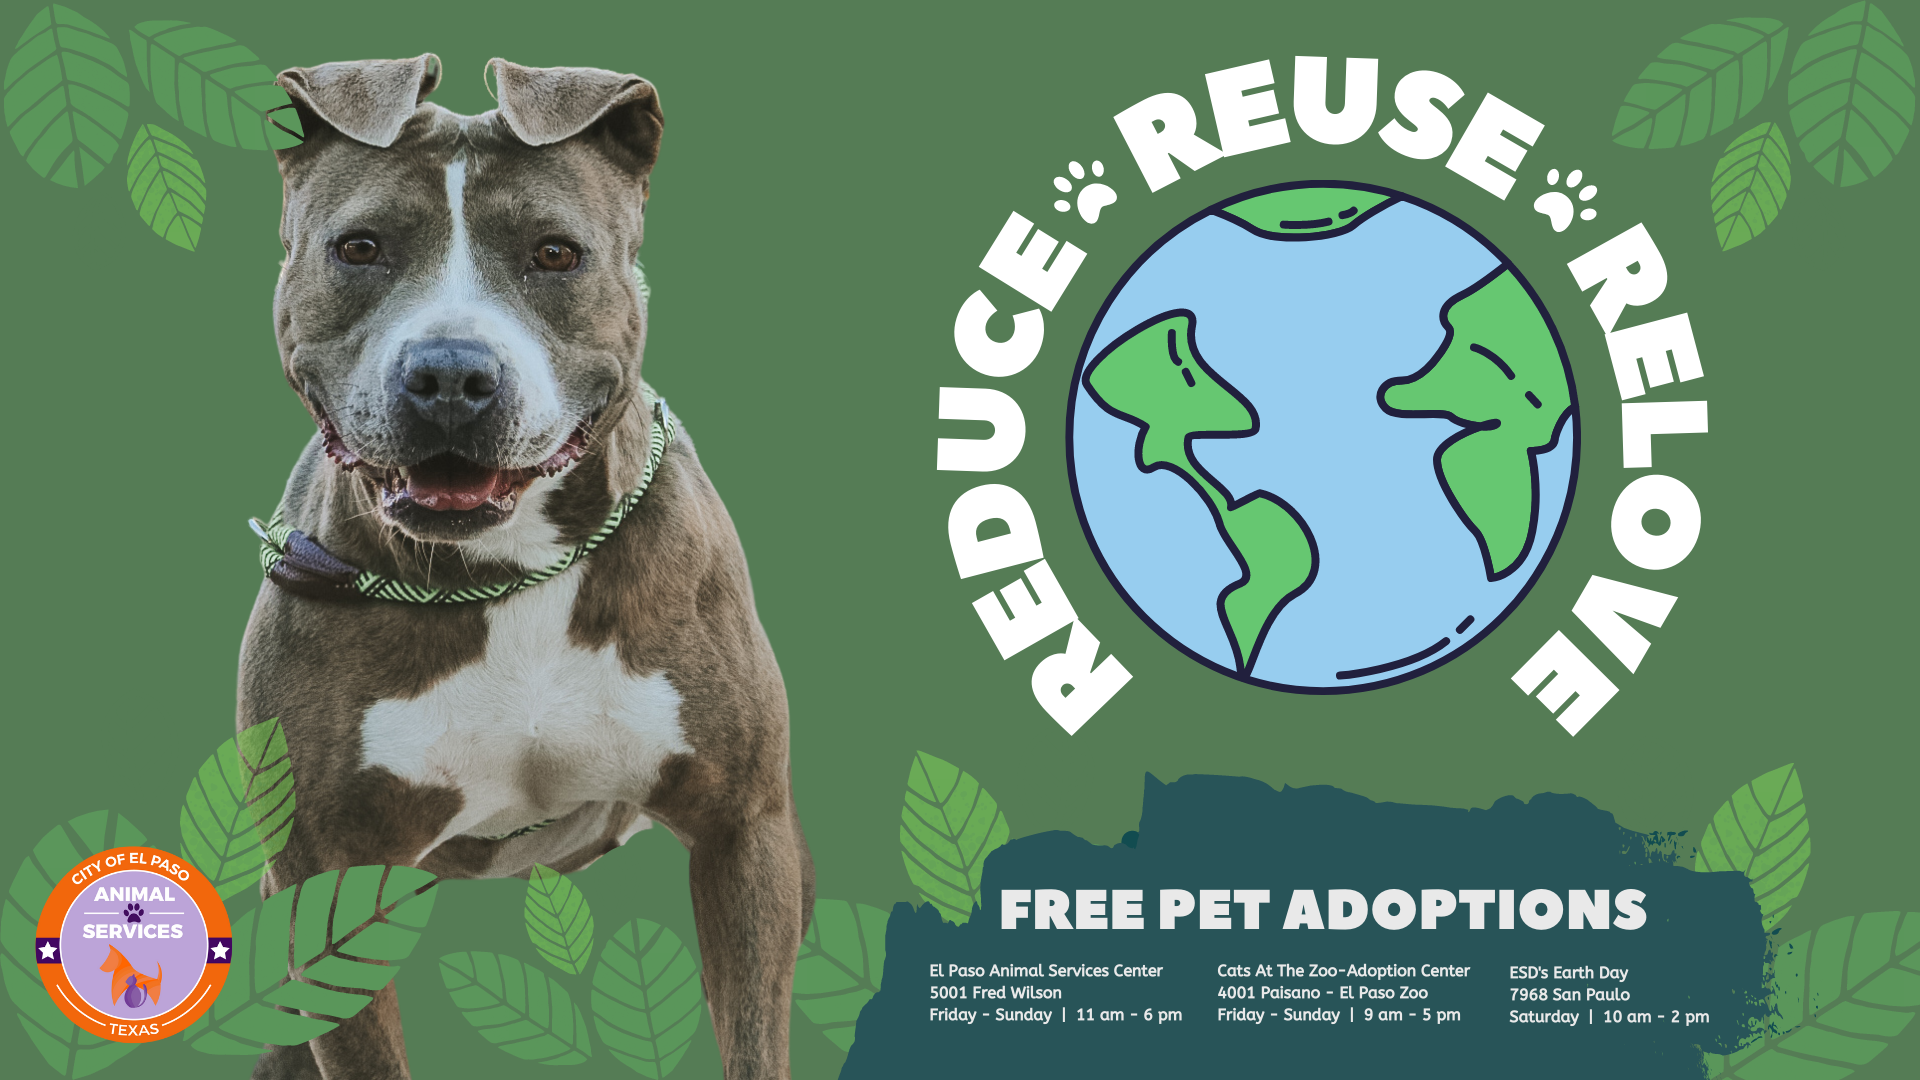 Mobile Pet Adoptions-ESD's Earth Day – El Paso Animal Services